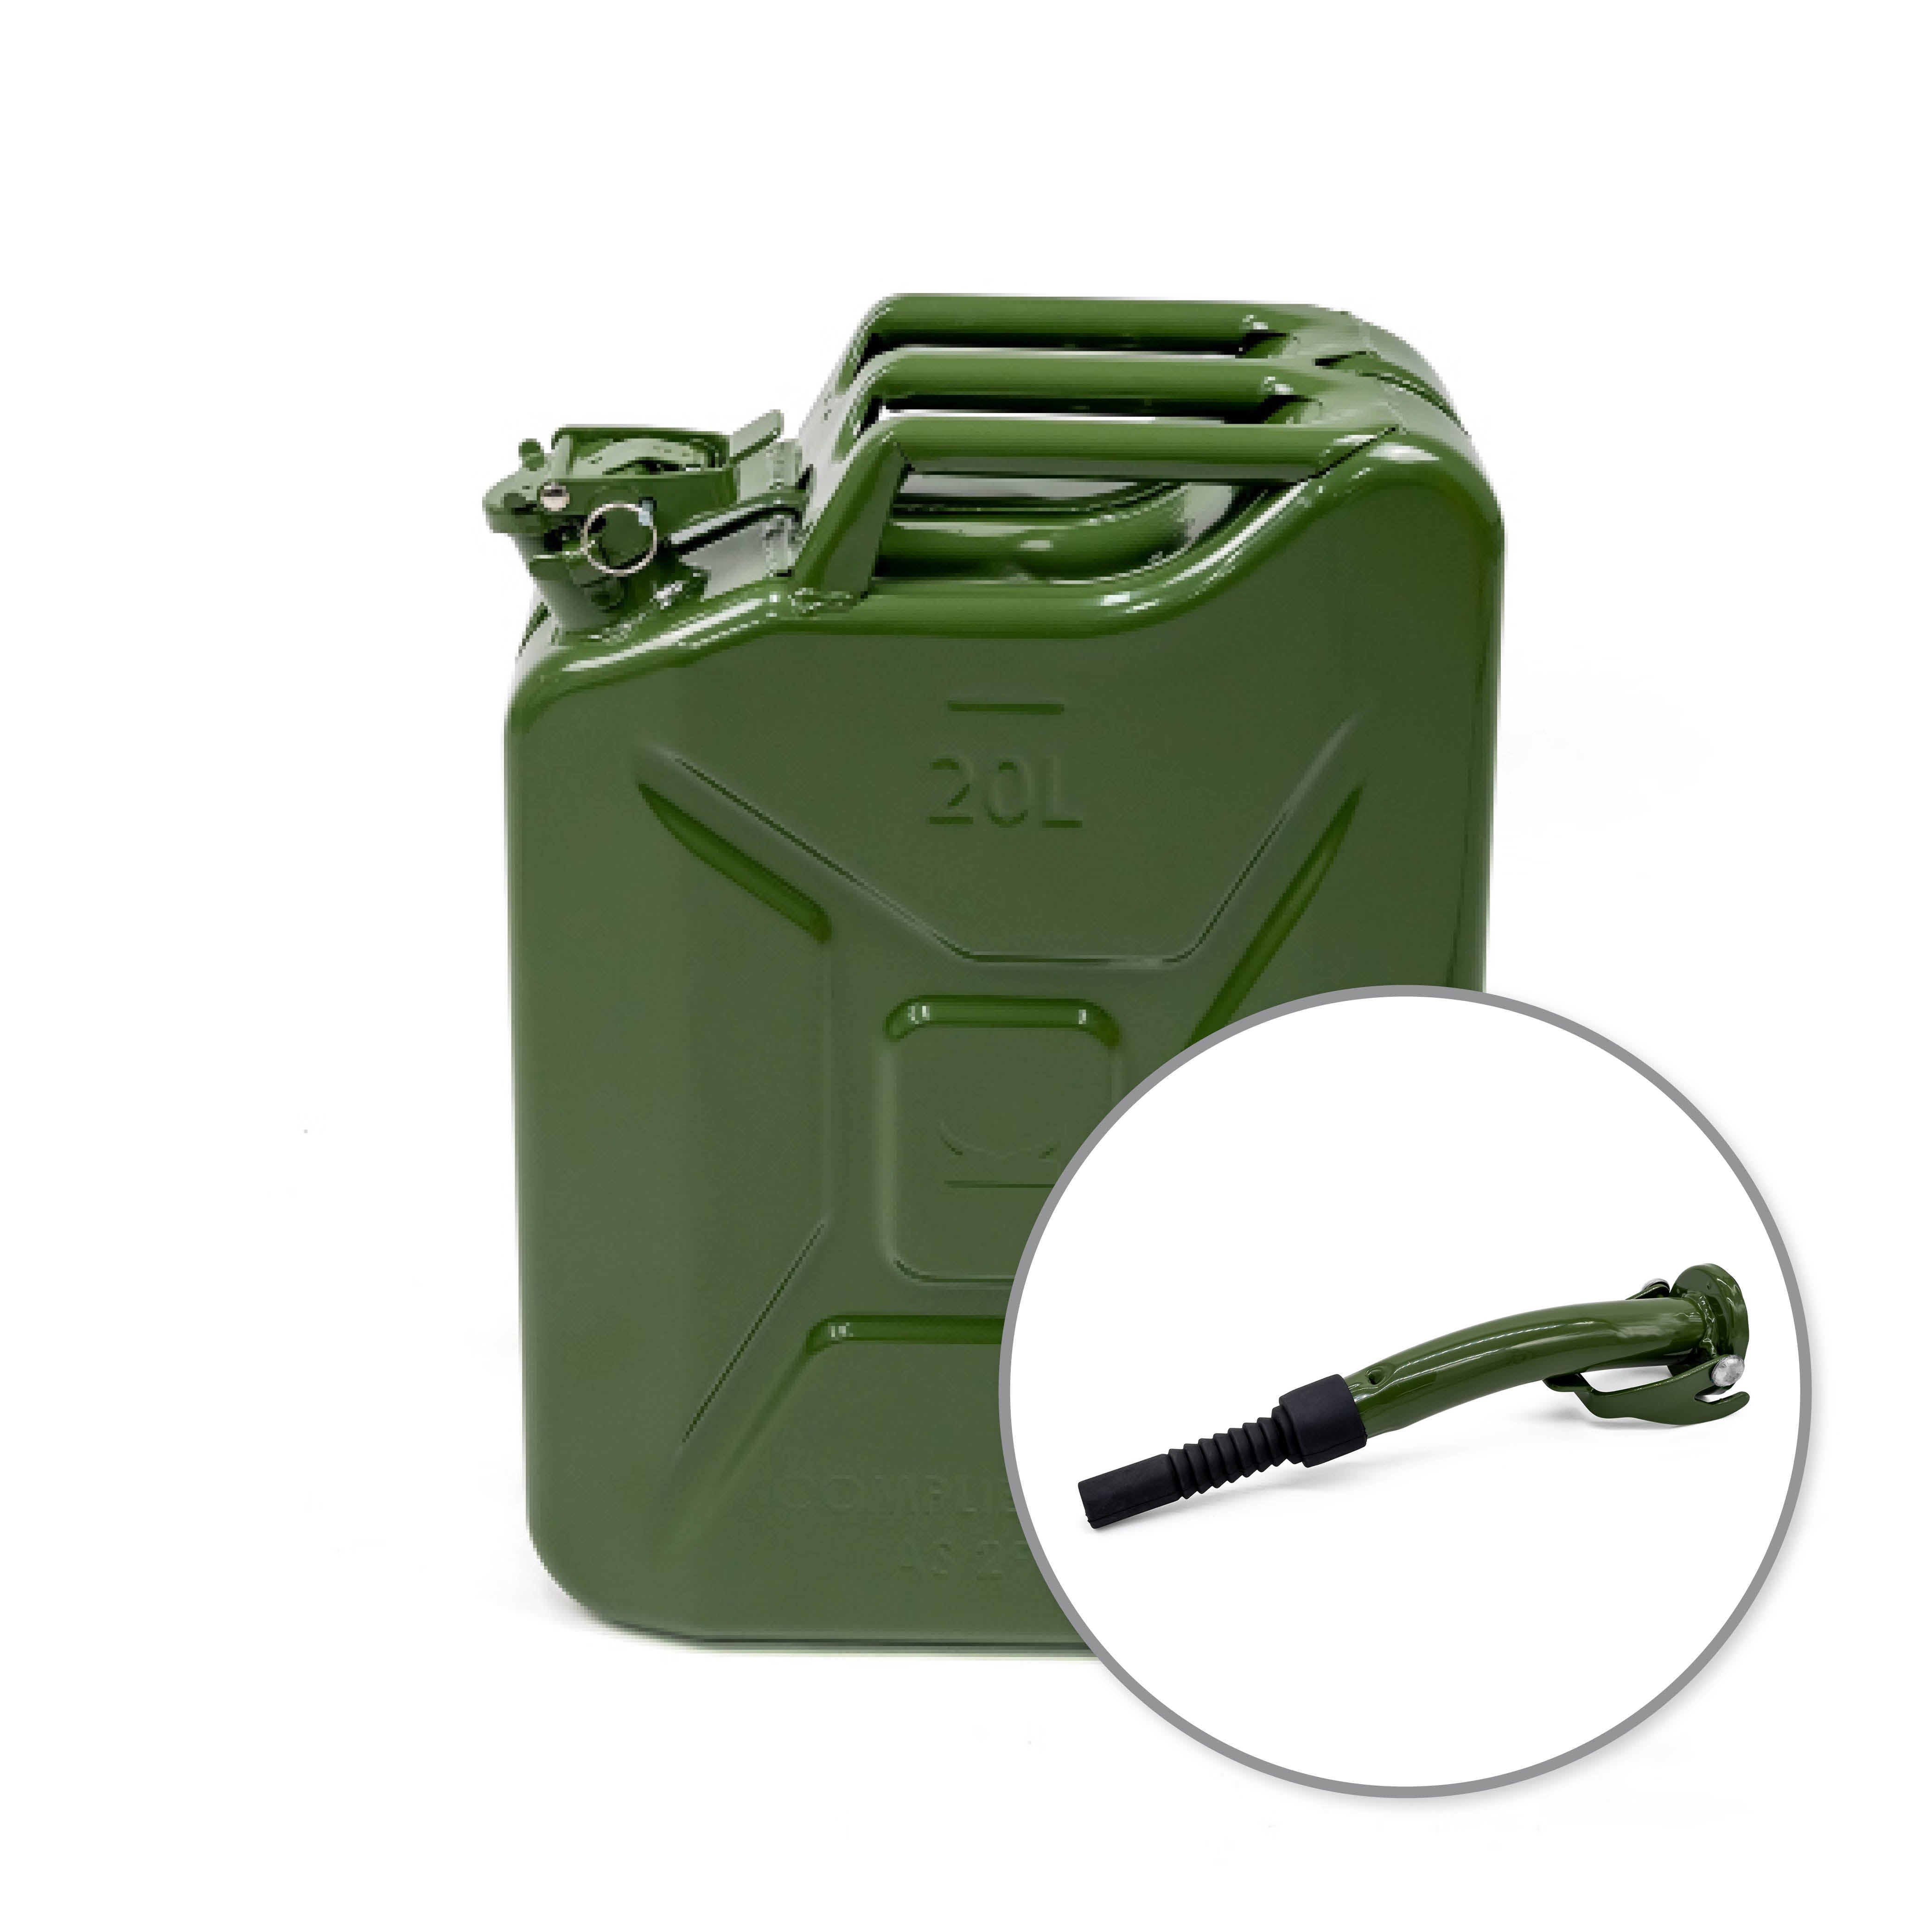 20L Jerry Can - Green